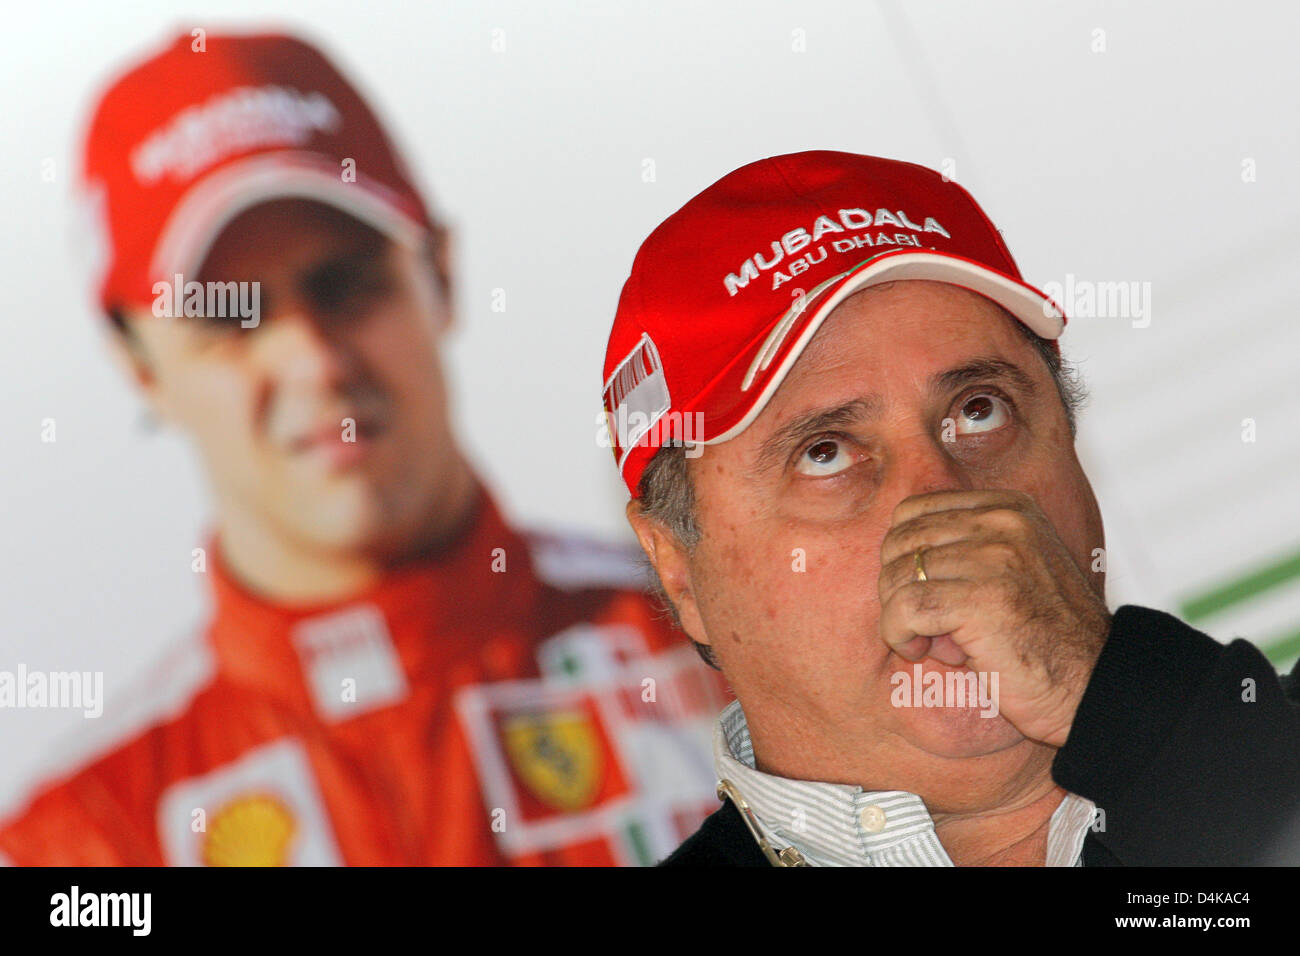 Luis Felipe Massa, father of Brazilian Formula One driver Felipe Massa of Scuderia Ferrari, scratches his nose during the second practice session at Shanghai International Circuit near Shanghai, China, 17 April 2009. The Chinese Grand Prix will take place in Shanghai on 19 April 2009. Photo: JENS BUETTNER Stock Photo